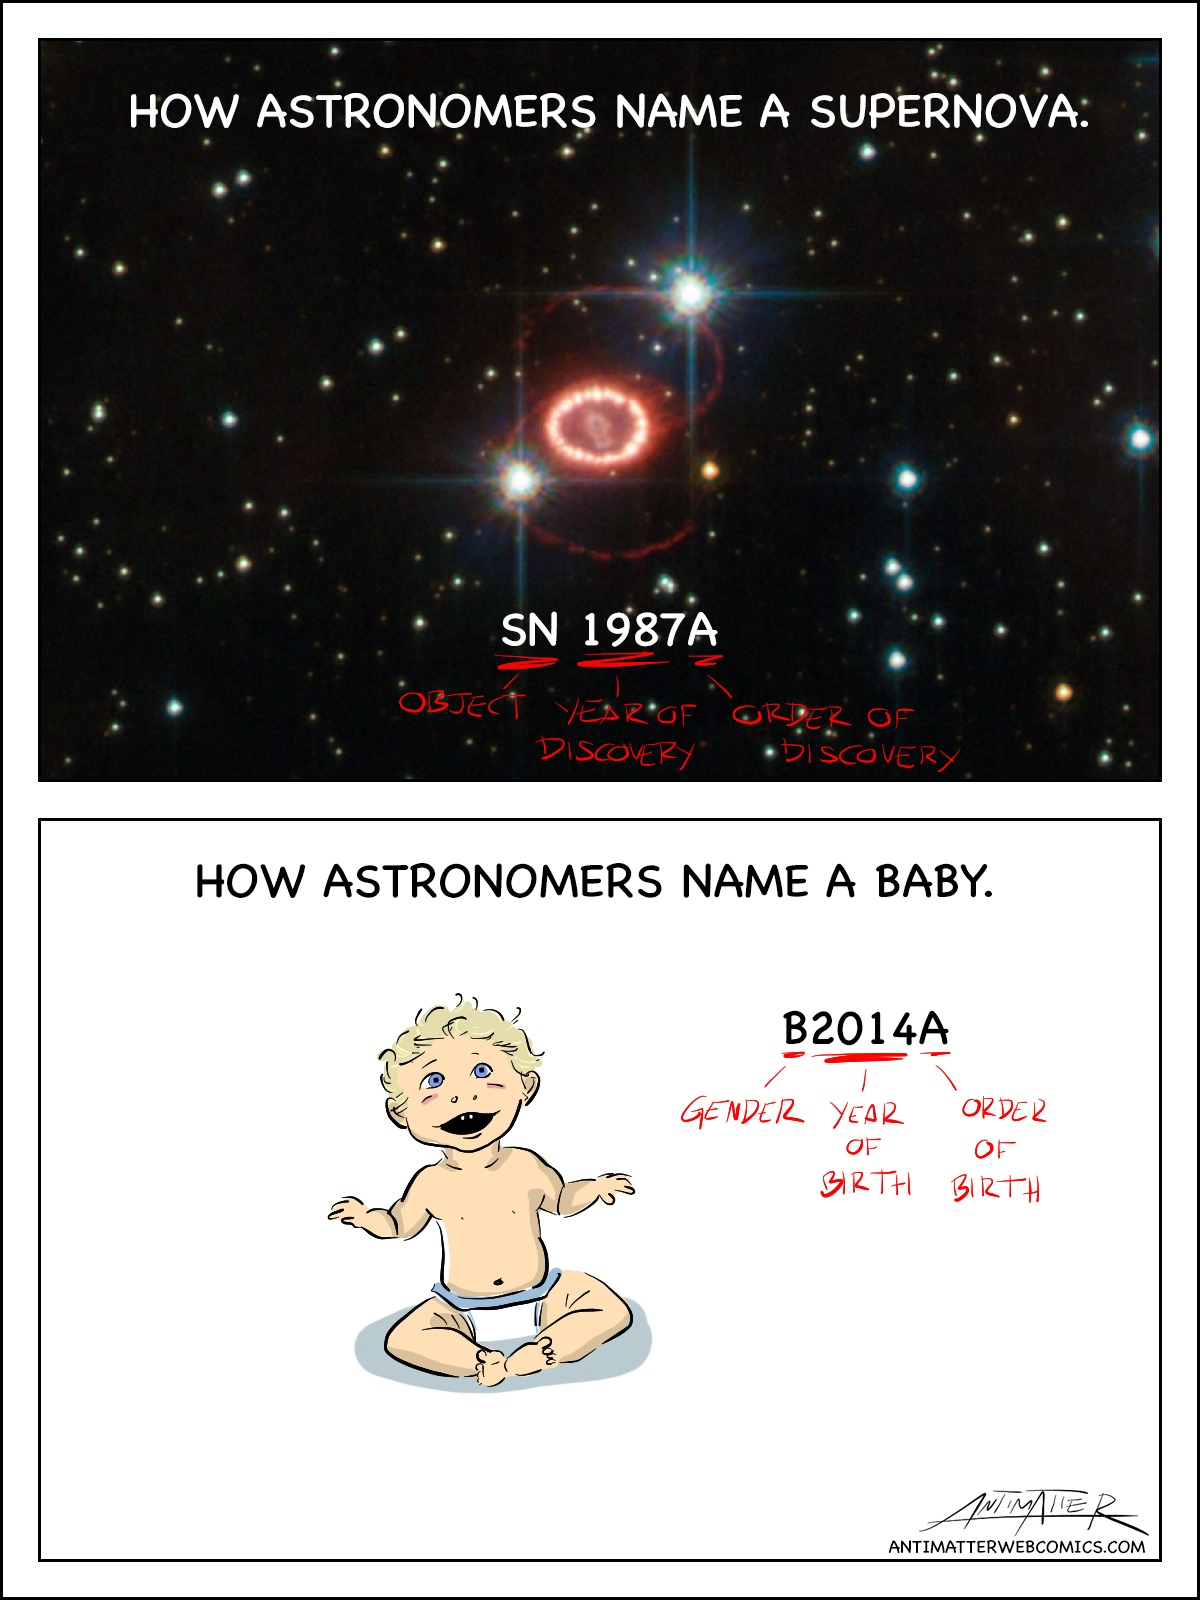 How astronomers name a baby